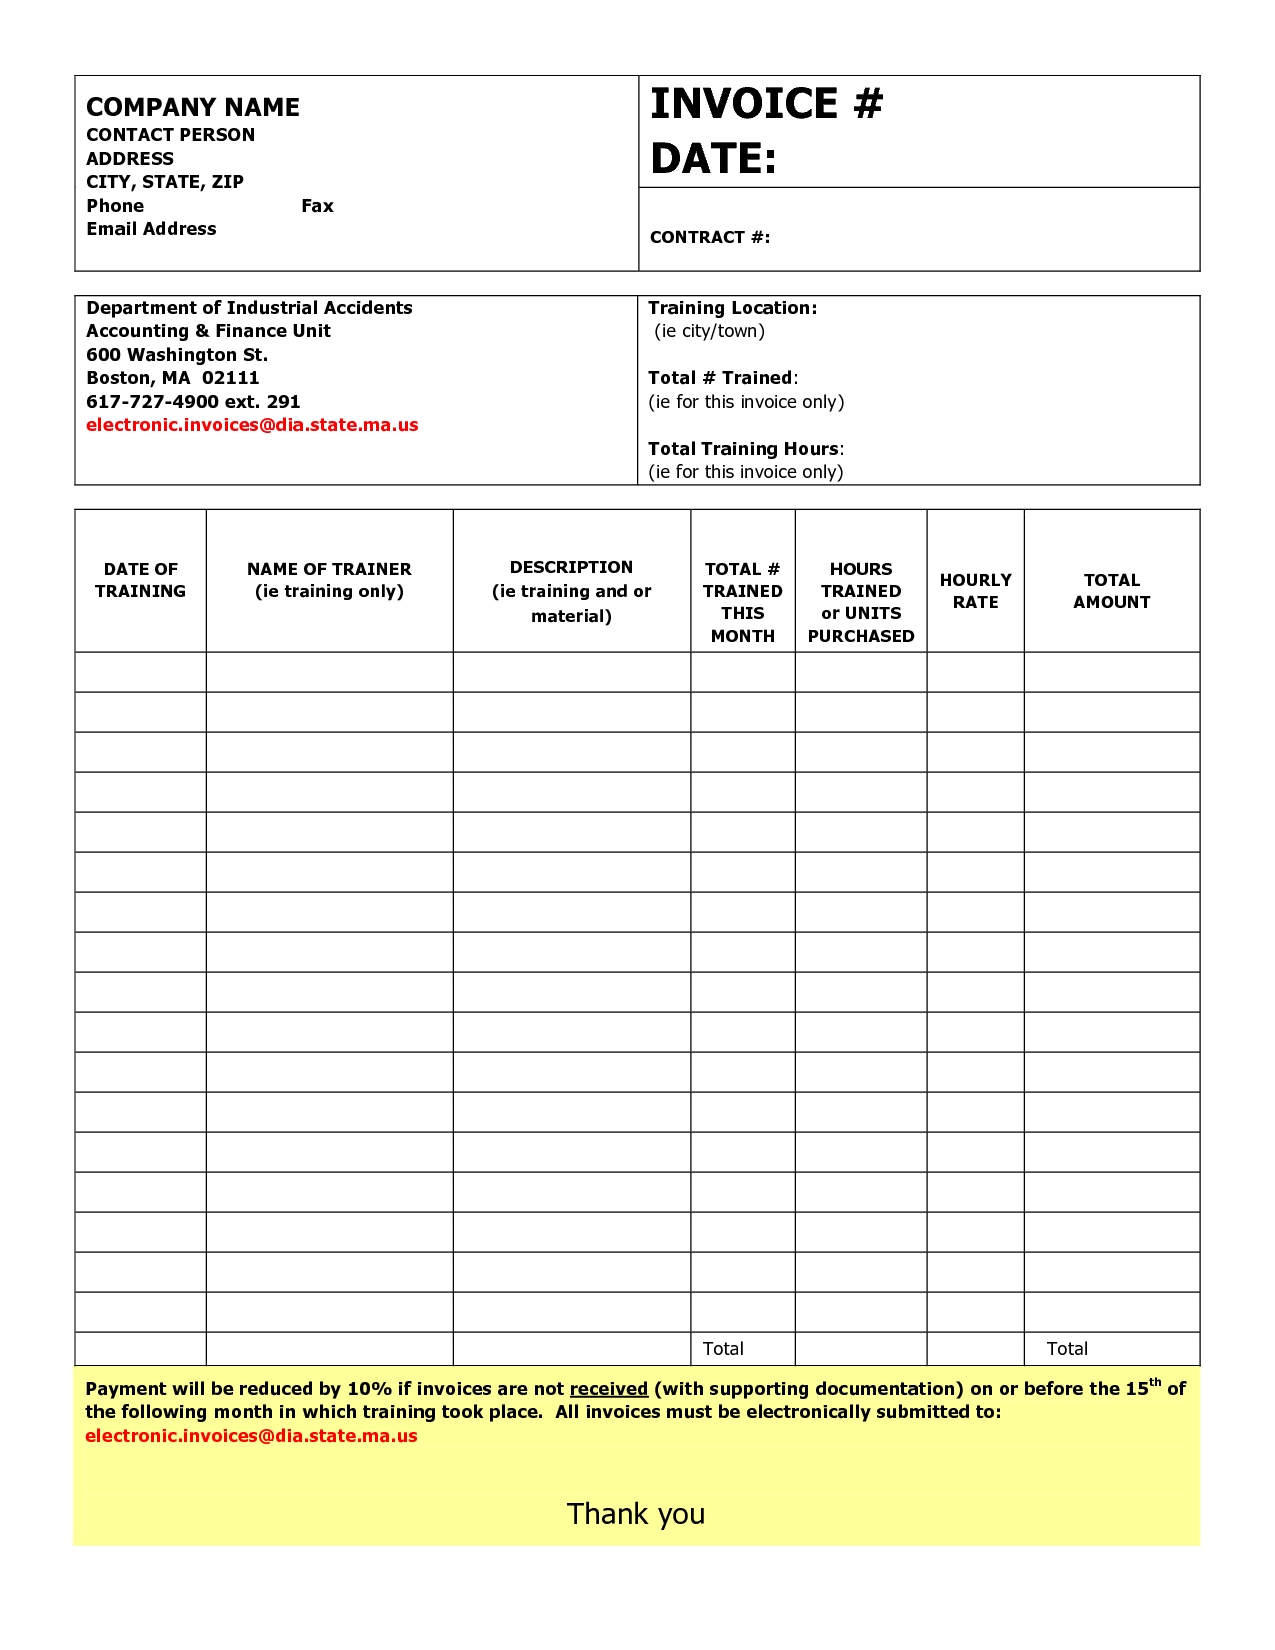 personal training invoice template cynthia blog30 personal training invoice template